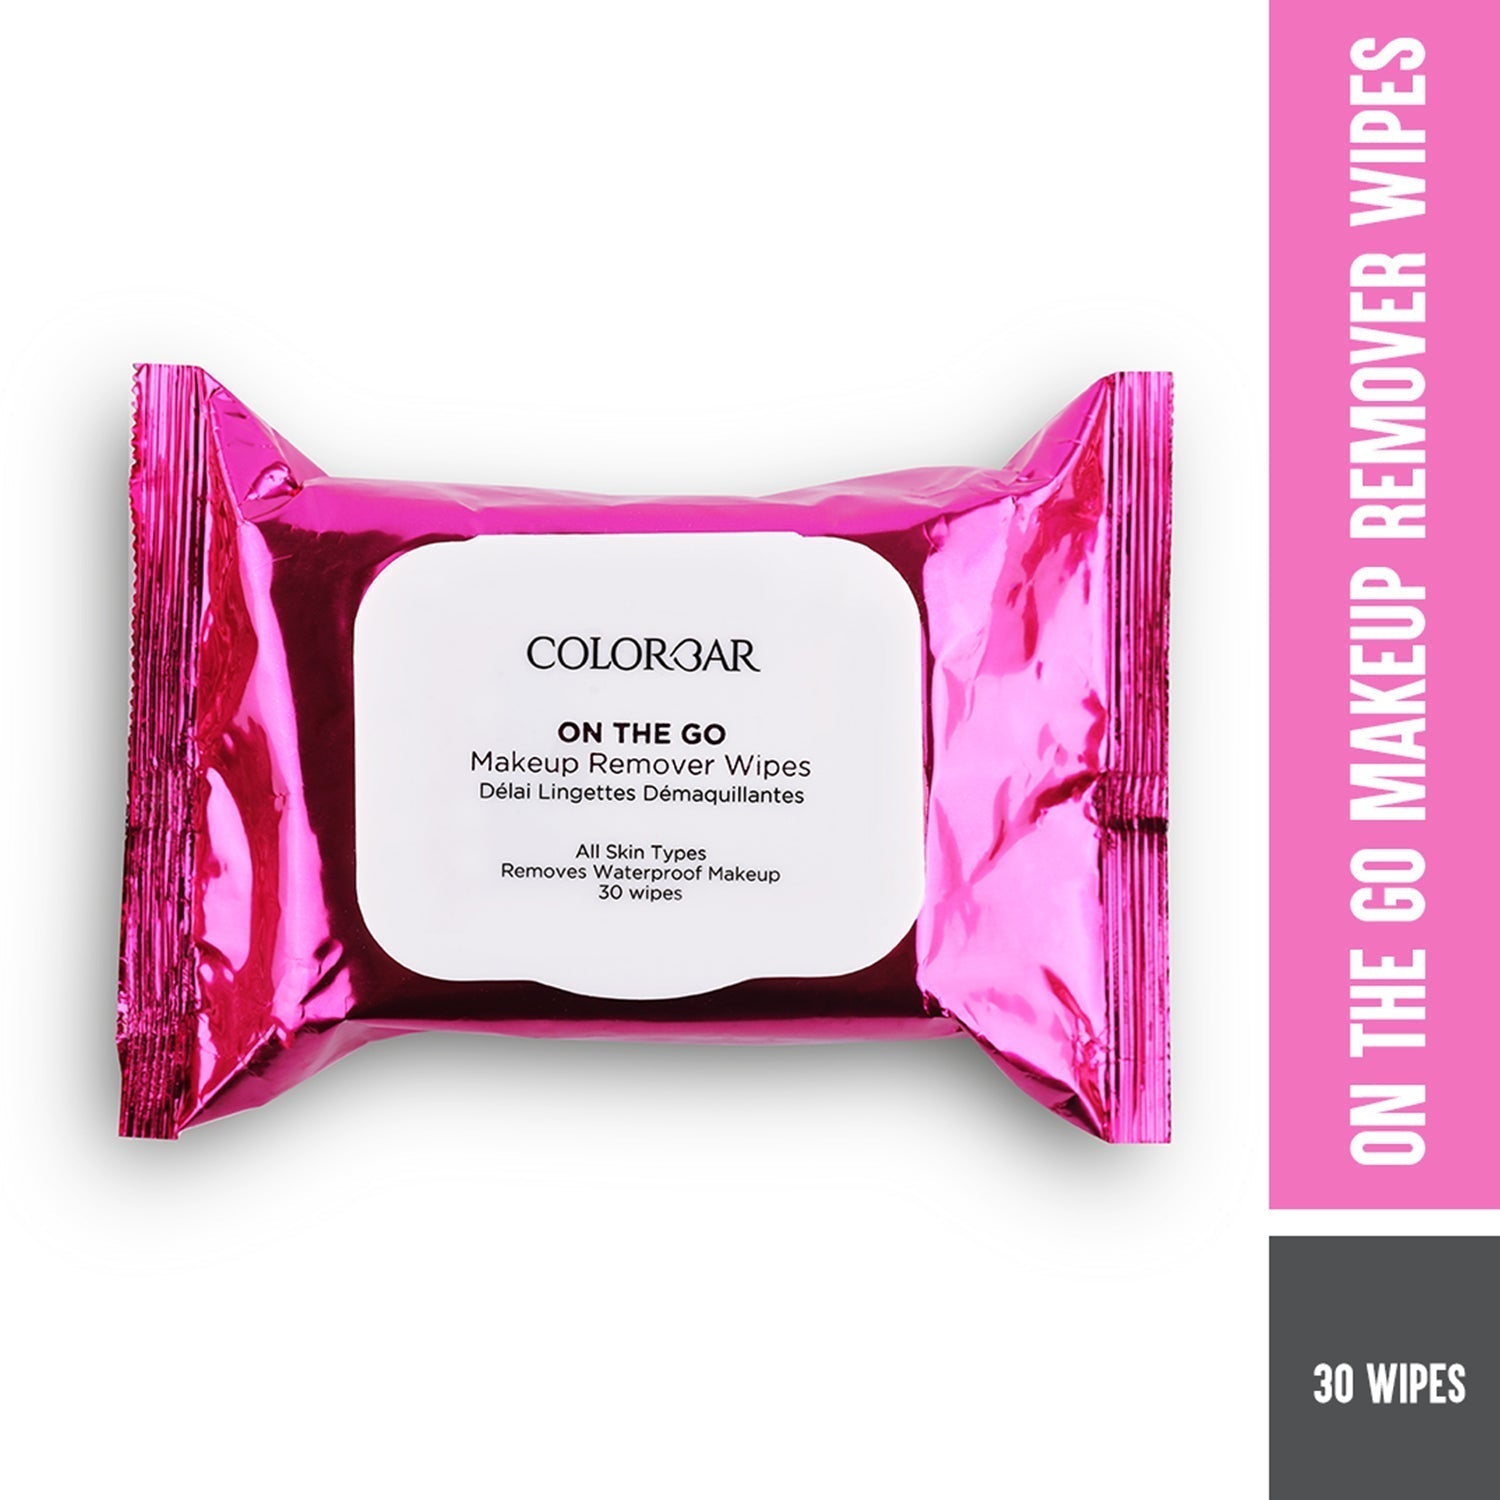 Colorbar On The Go Makeup Remover Wipes - buy in USA, Australia, Canada